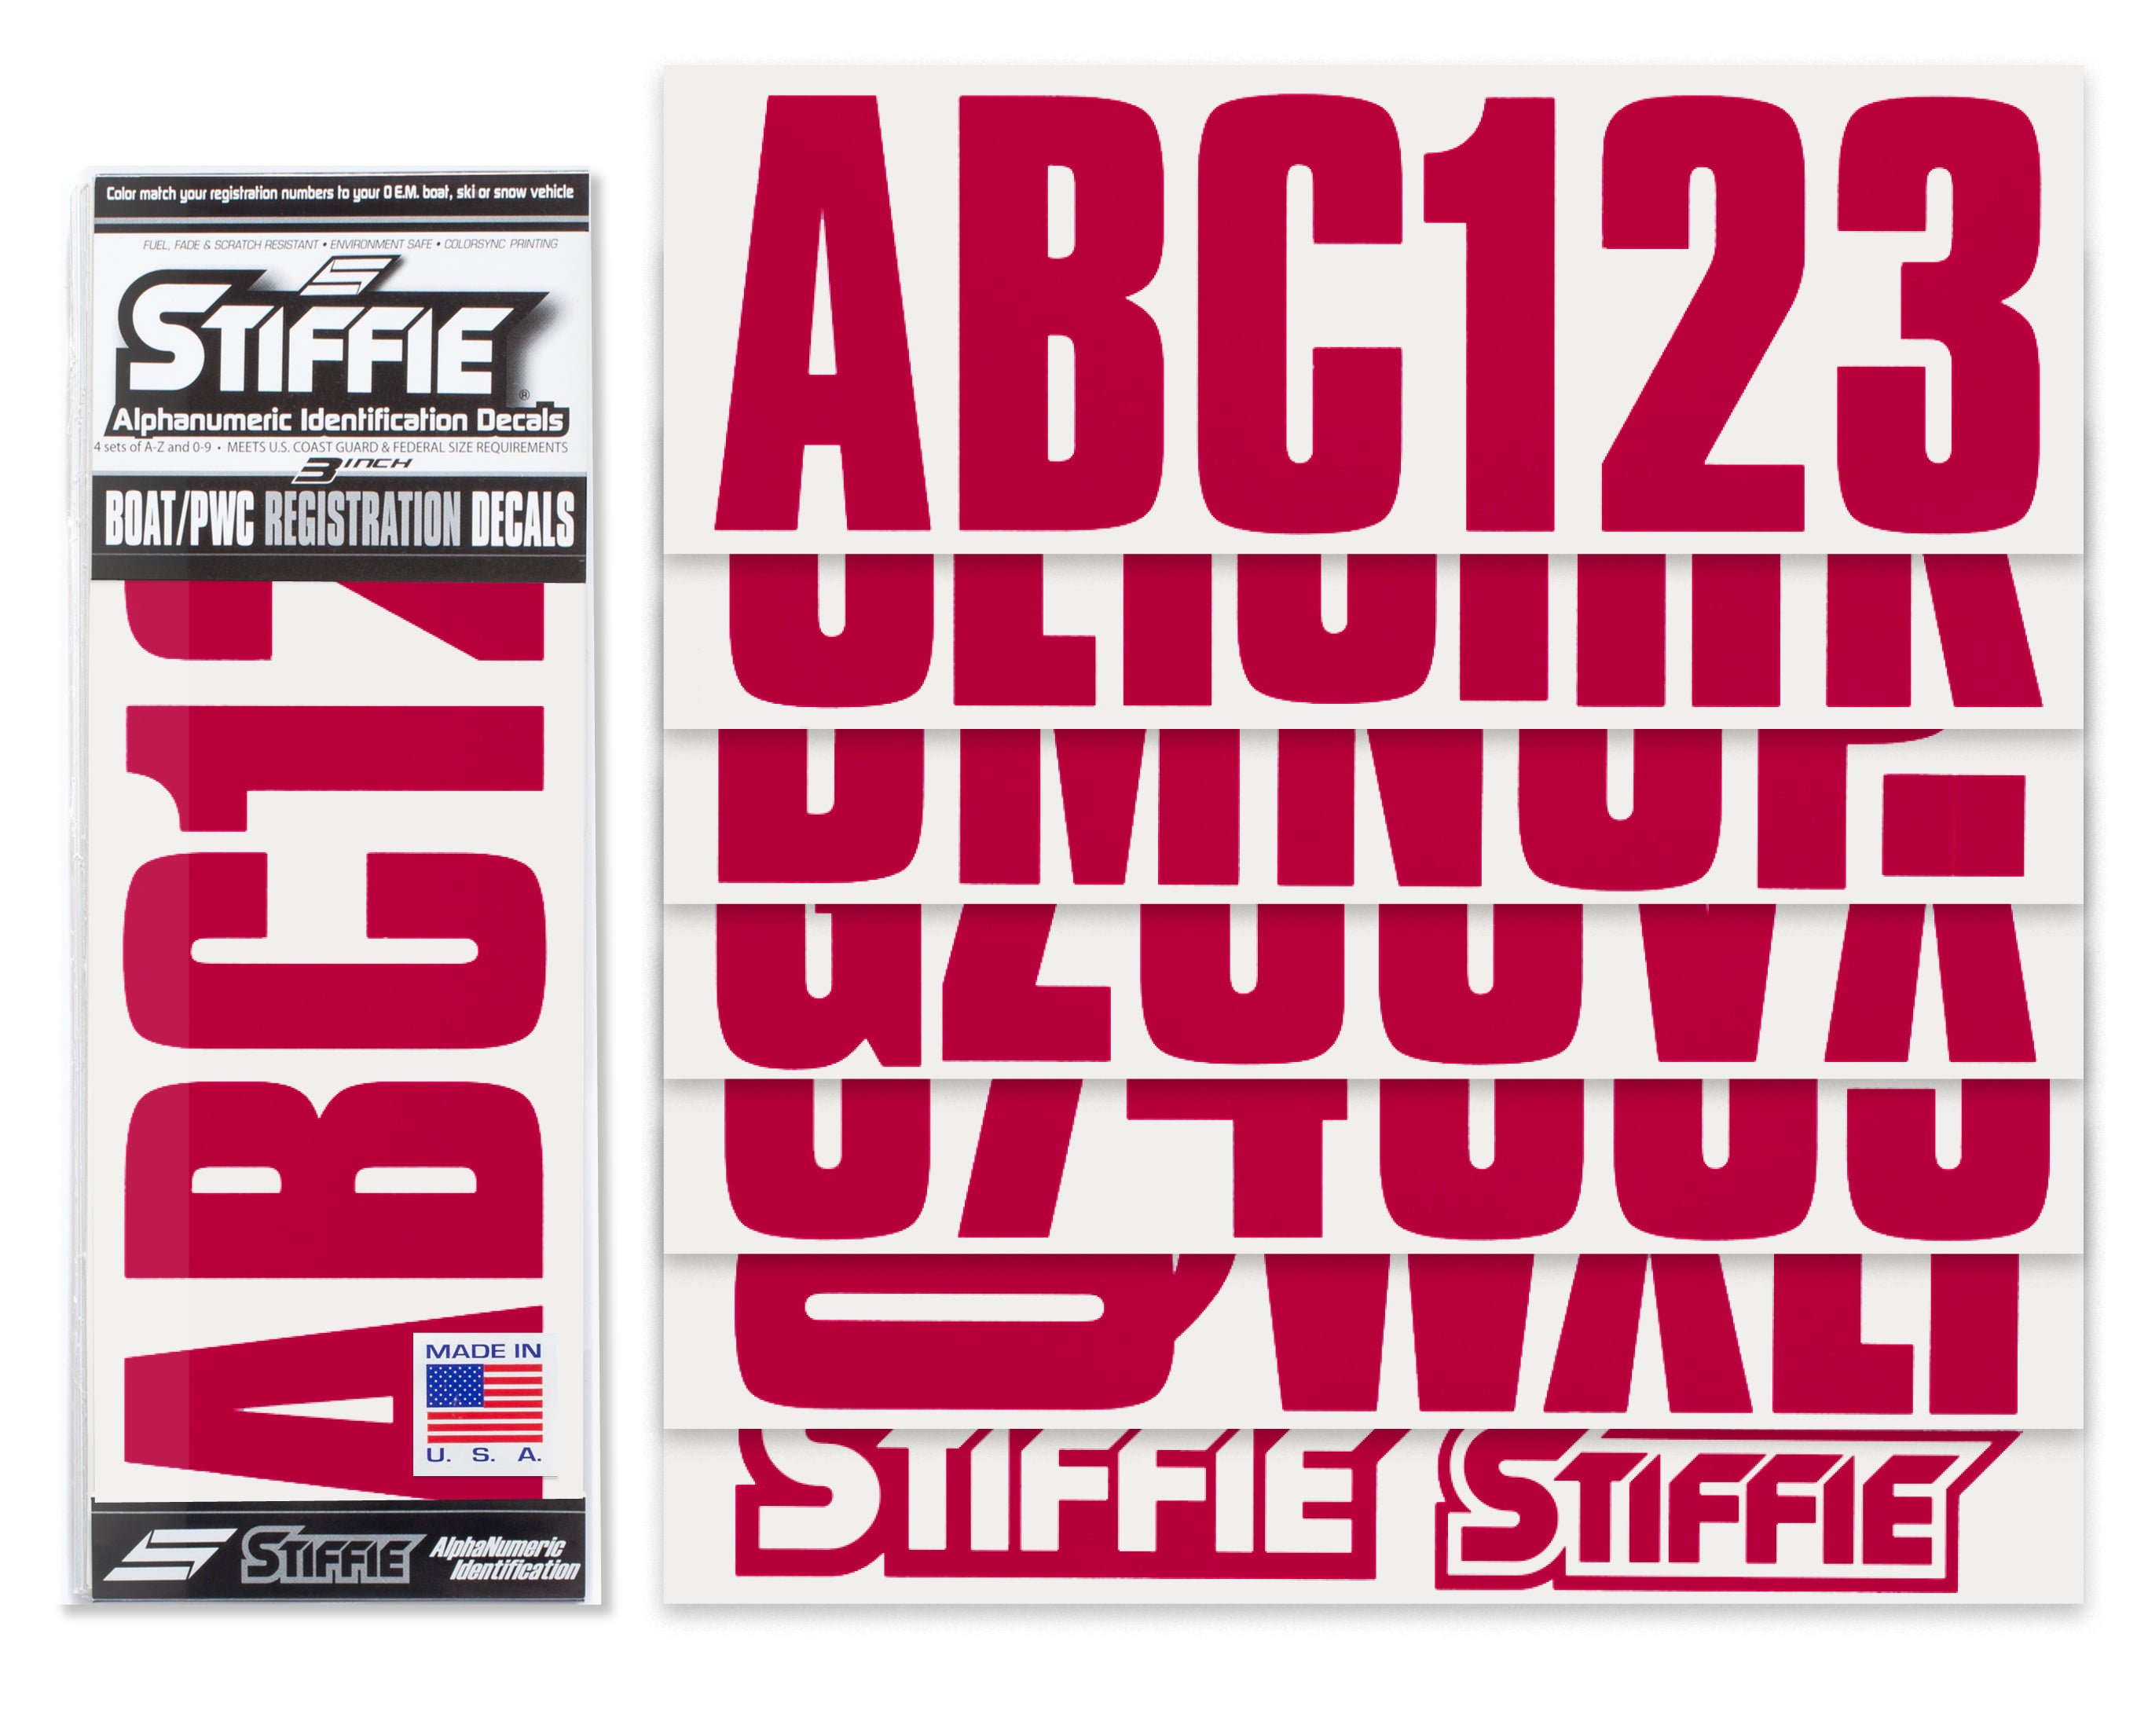 STIFFIE Uniline Burgundy 3" ID Kit Alpha-Numeric Registration Identification Numbers Stickers Decals for Boats & Personal Watercraft